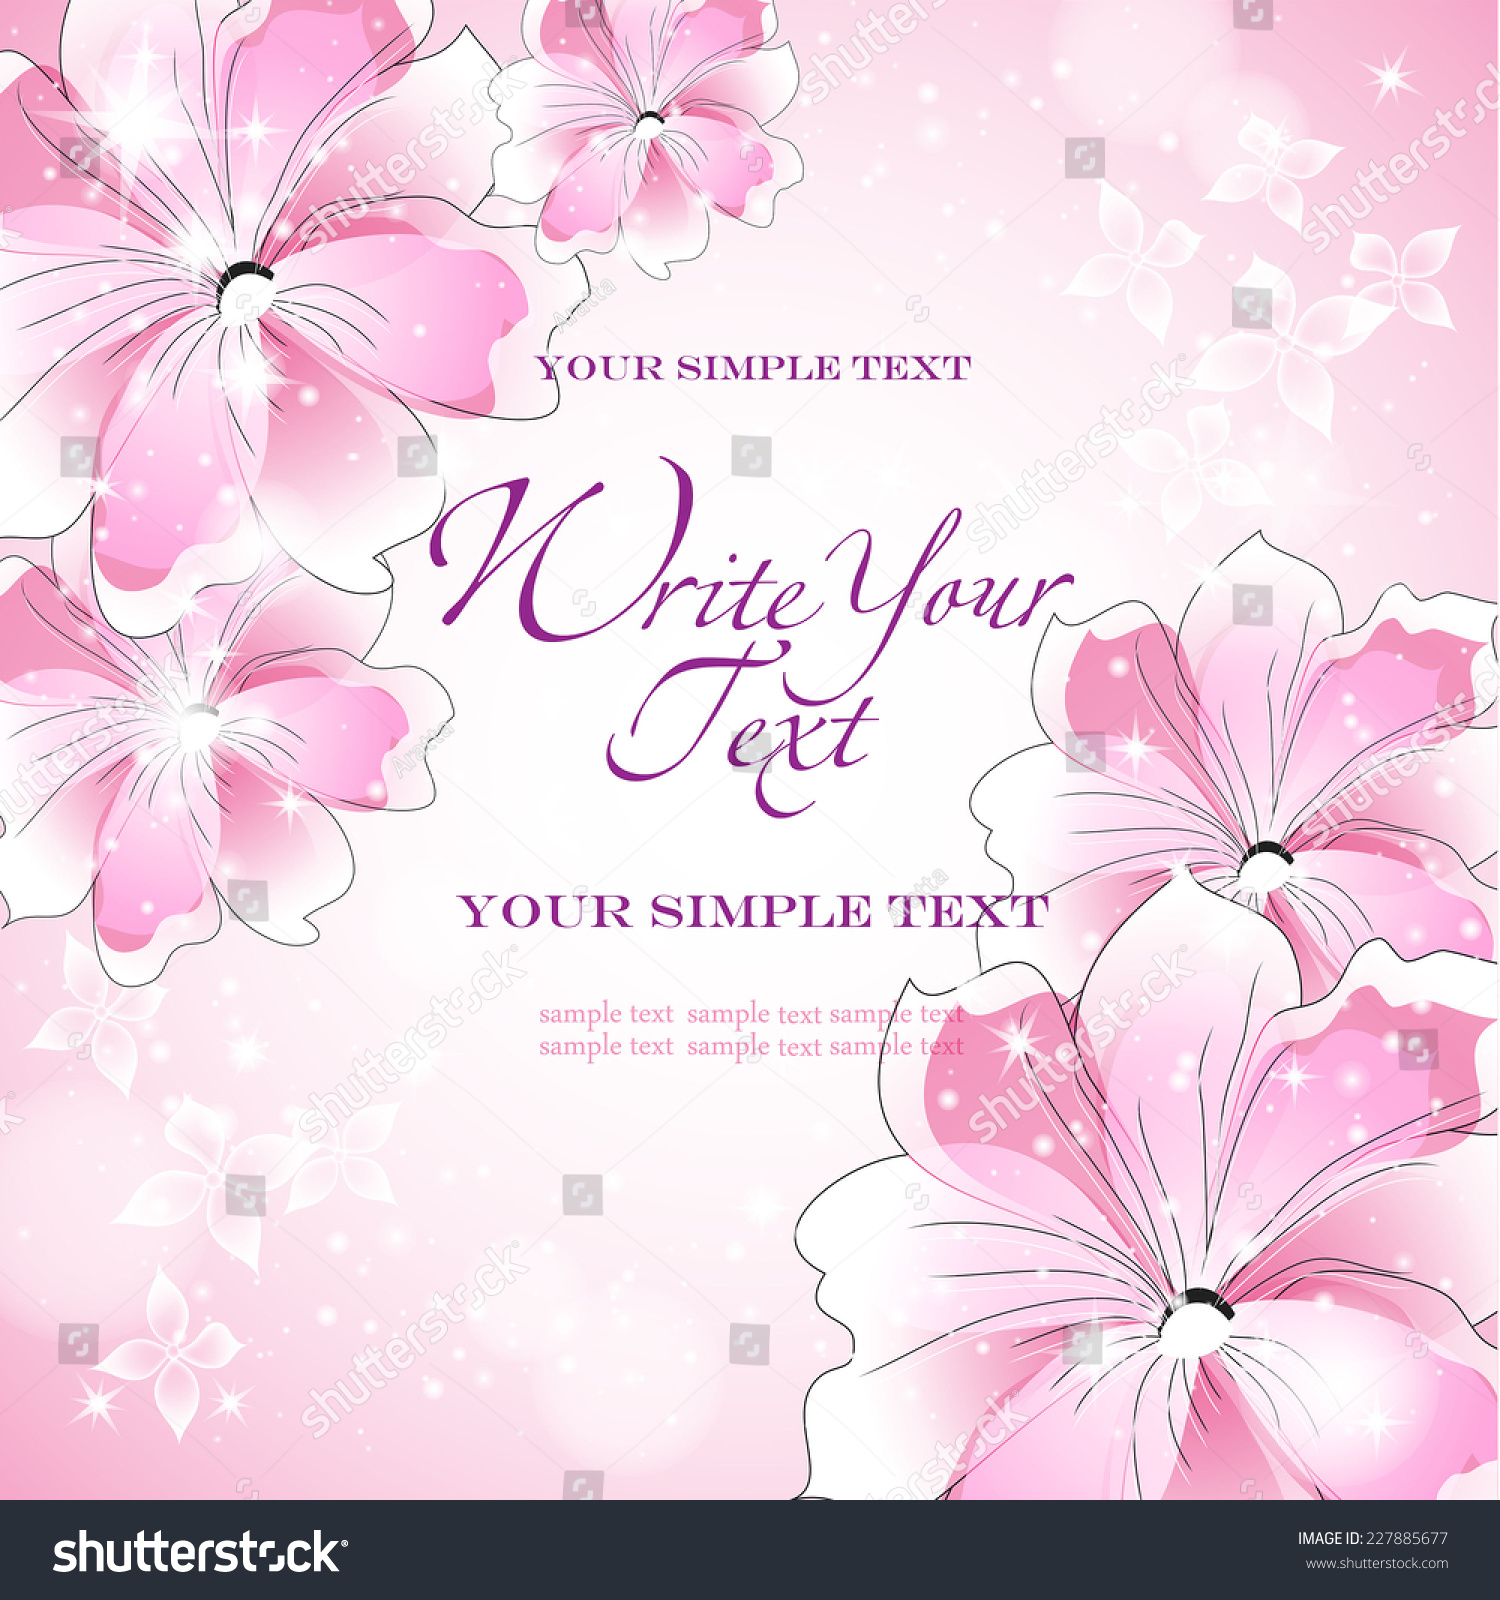 Wedding Card Invitation Abstract Floral Background Stock Vector ...